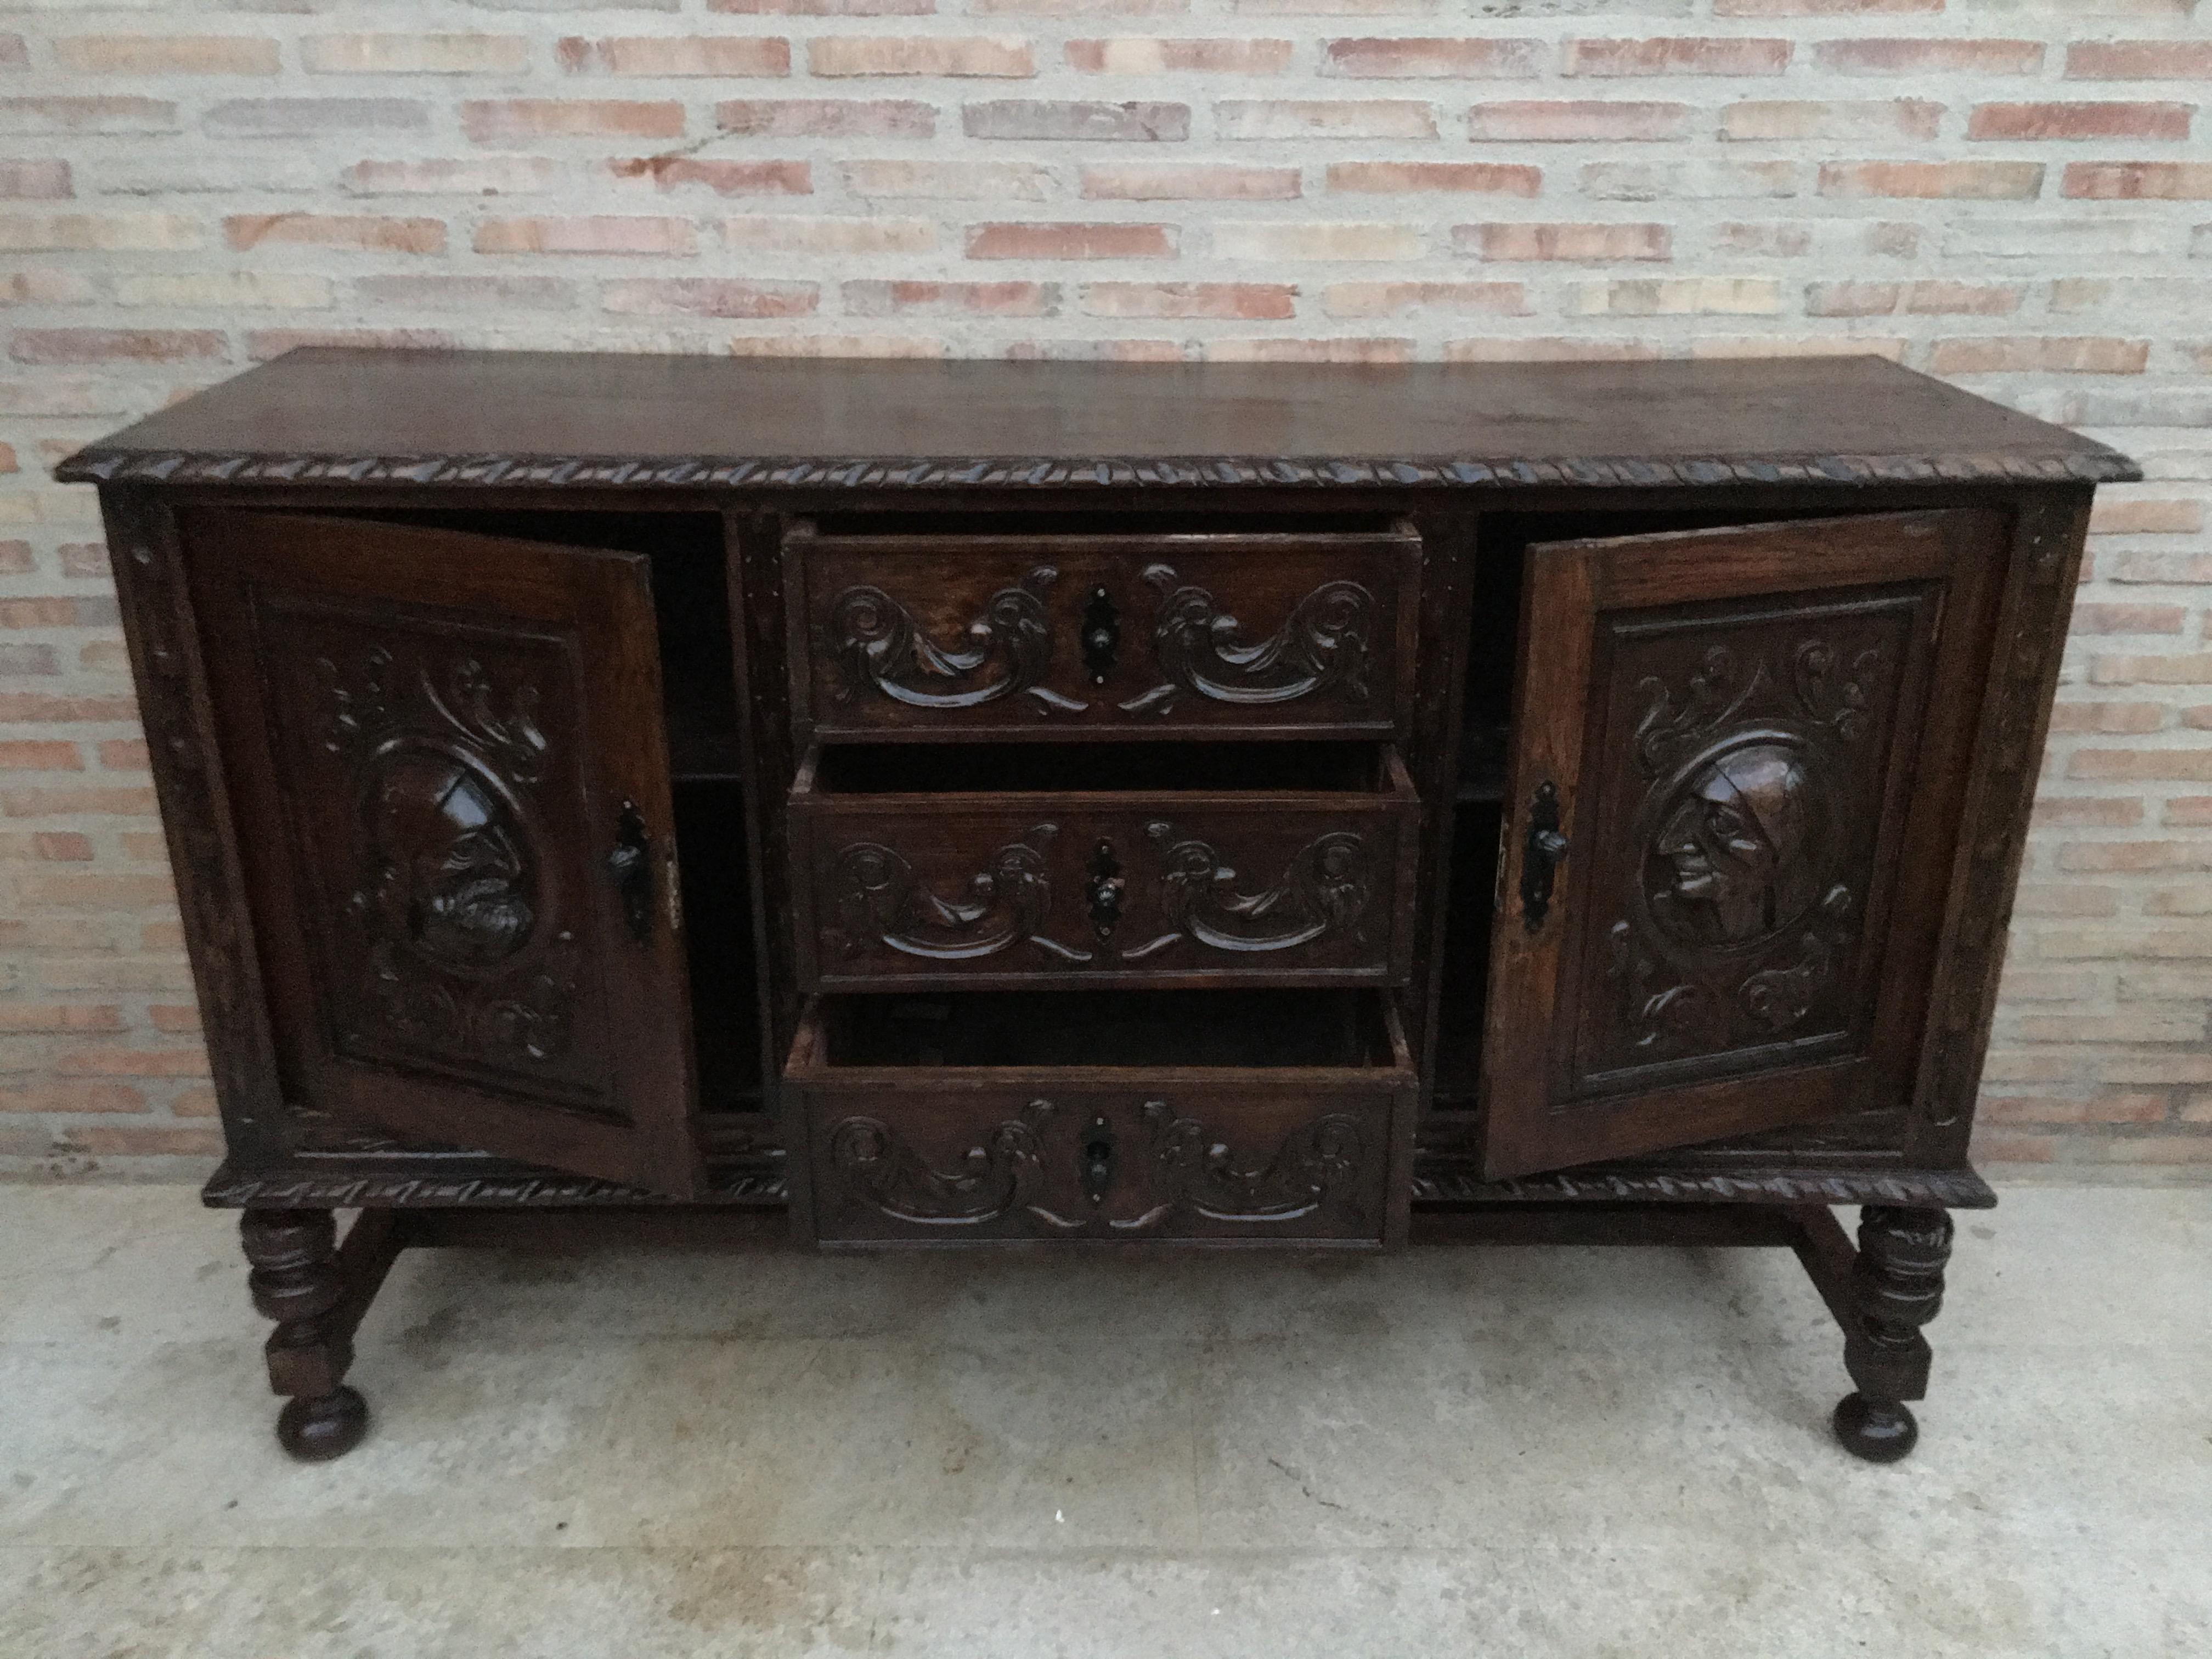 19th century Spanish Renaissance buffet was sculpted from dense, old-growth oak with glorious full relief depictions. Set upon a brilliantly molded framework, the carved door panels are framed by clockwise and counter-clockwise barley columns, with